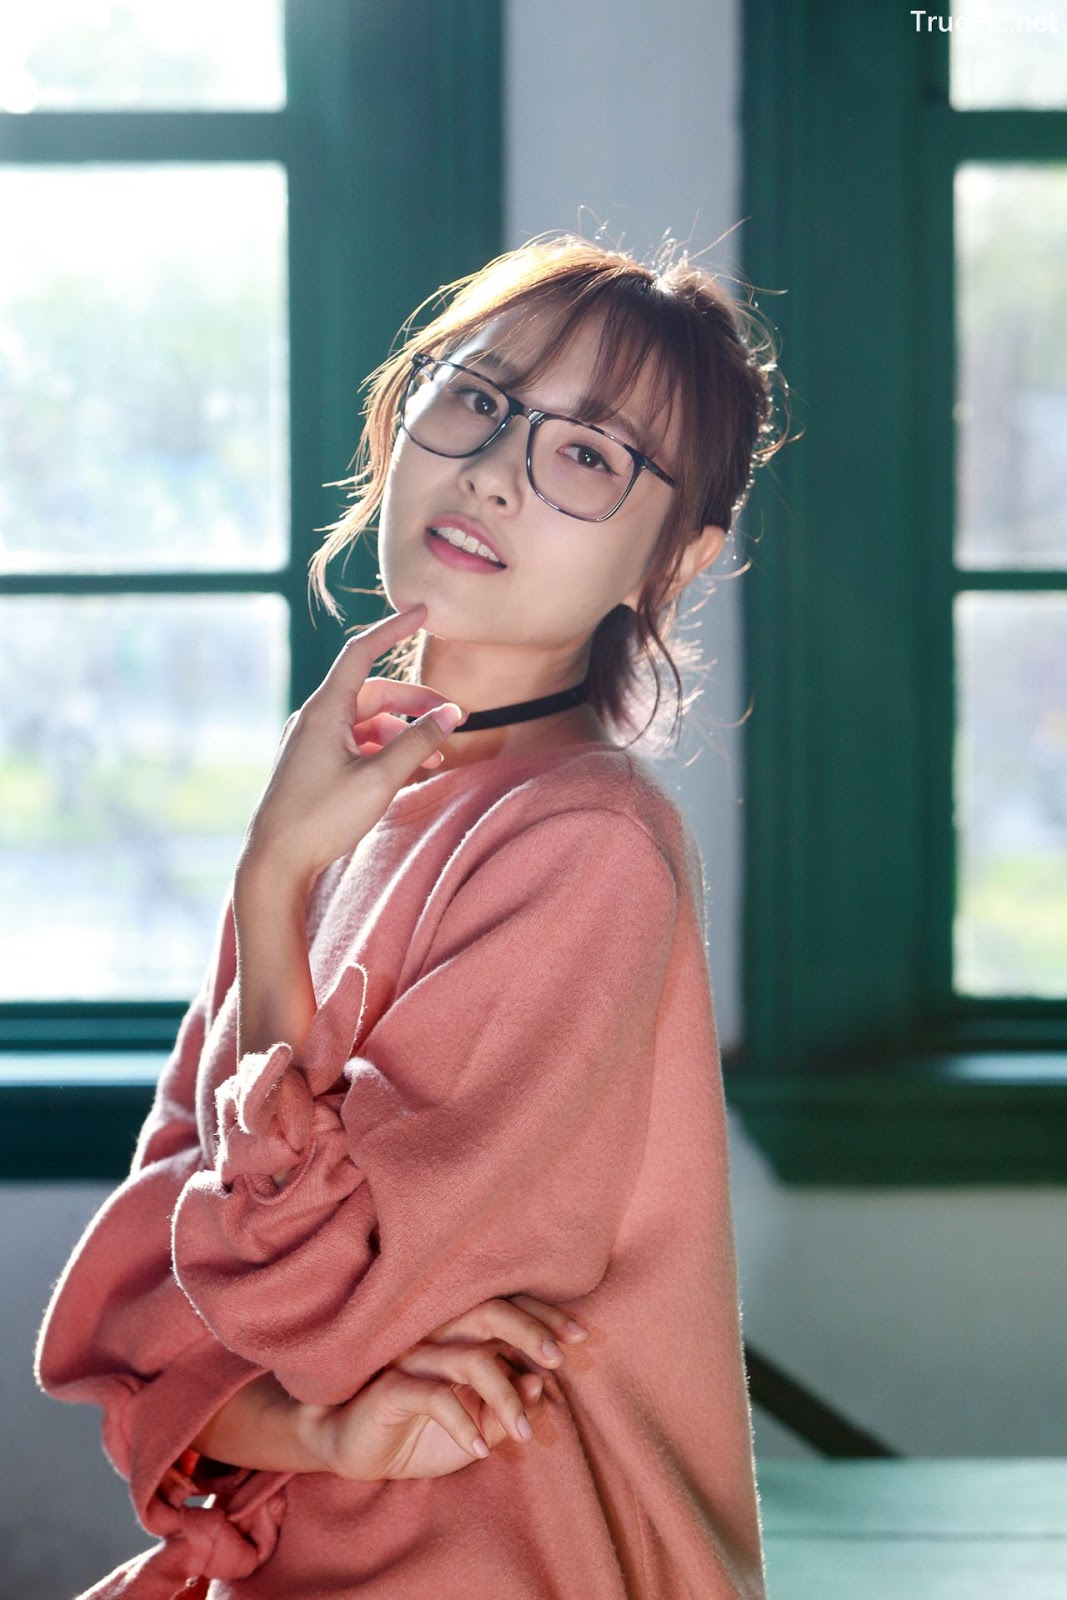 Image-Taiwanese-Model-郭思敏-Pure-And-Gorgeous-Girl-In-Pink-Sweater-Dress-TruePic.net- Picture-27